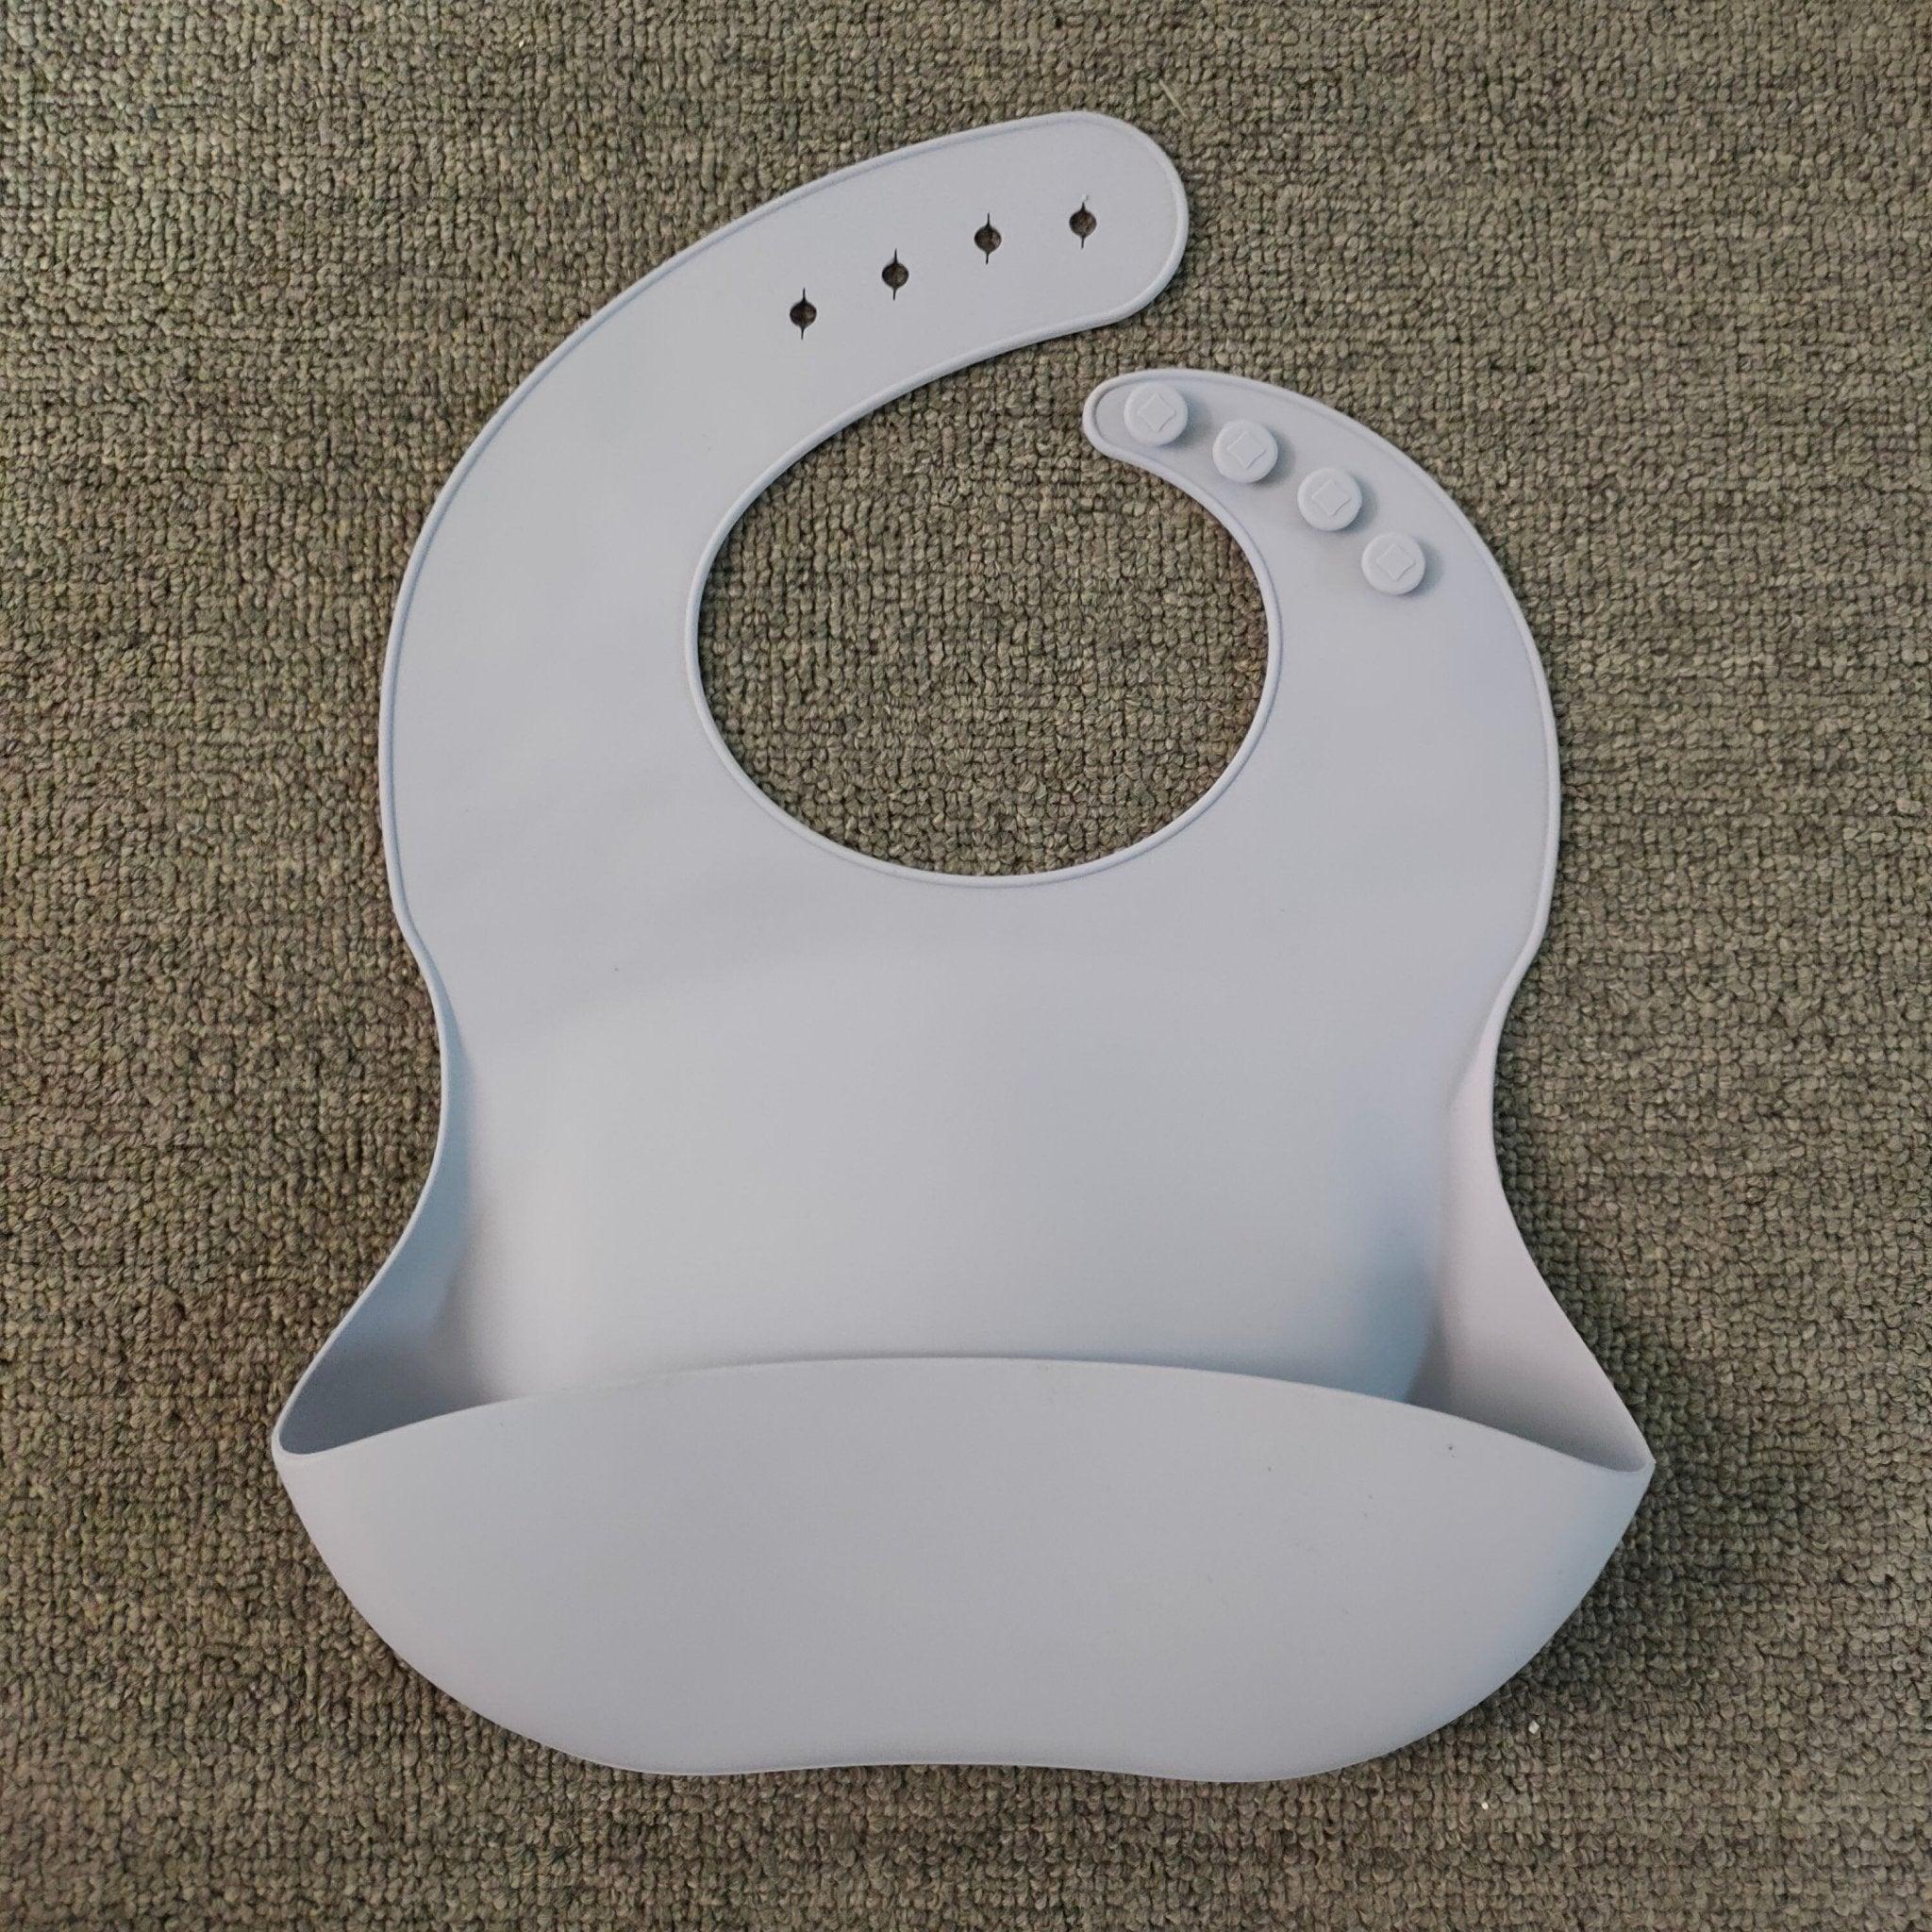 Soft Waterproof Silicone Baby Bib with Food Catcher, Baby Silicone Bib - Baby Bibs -  Trend Goods